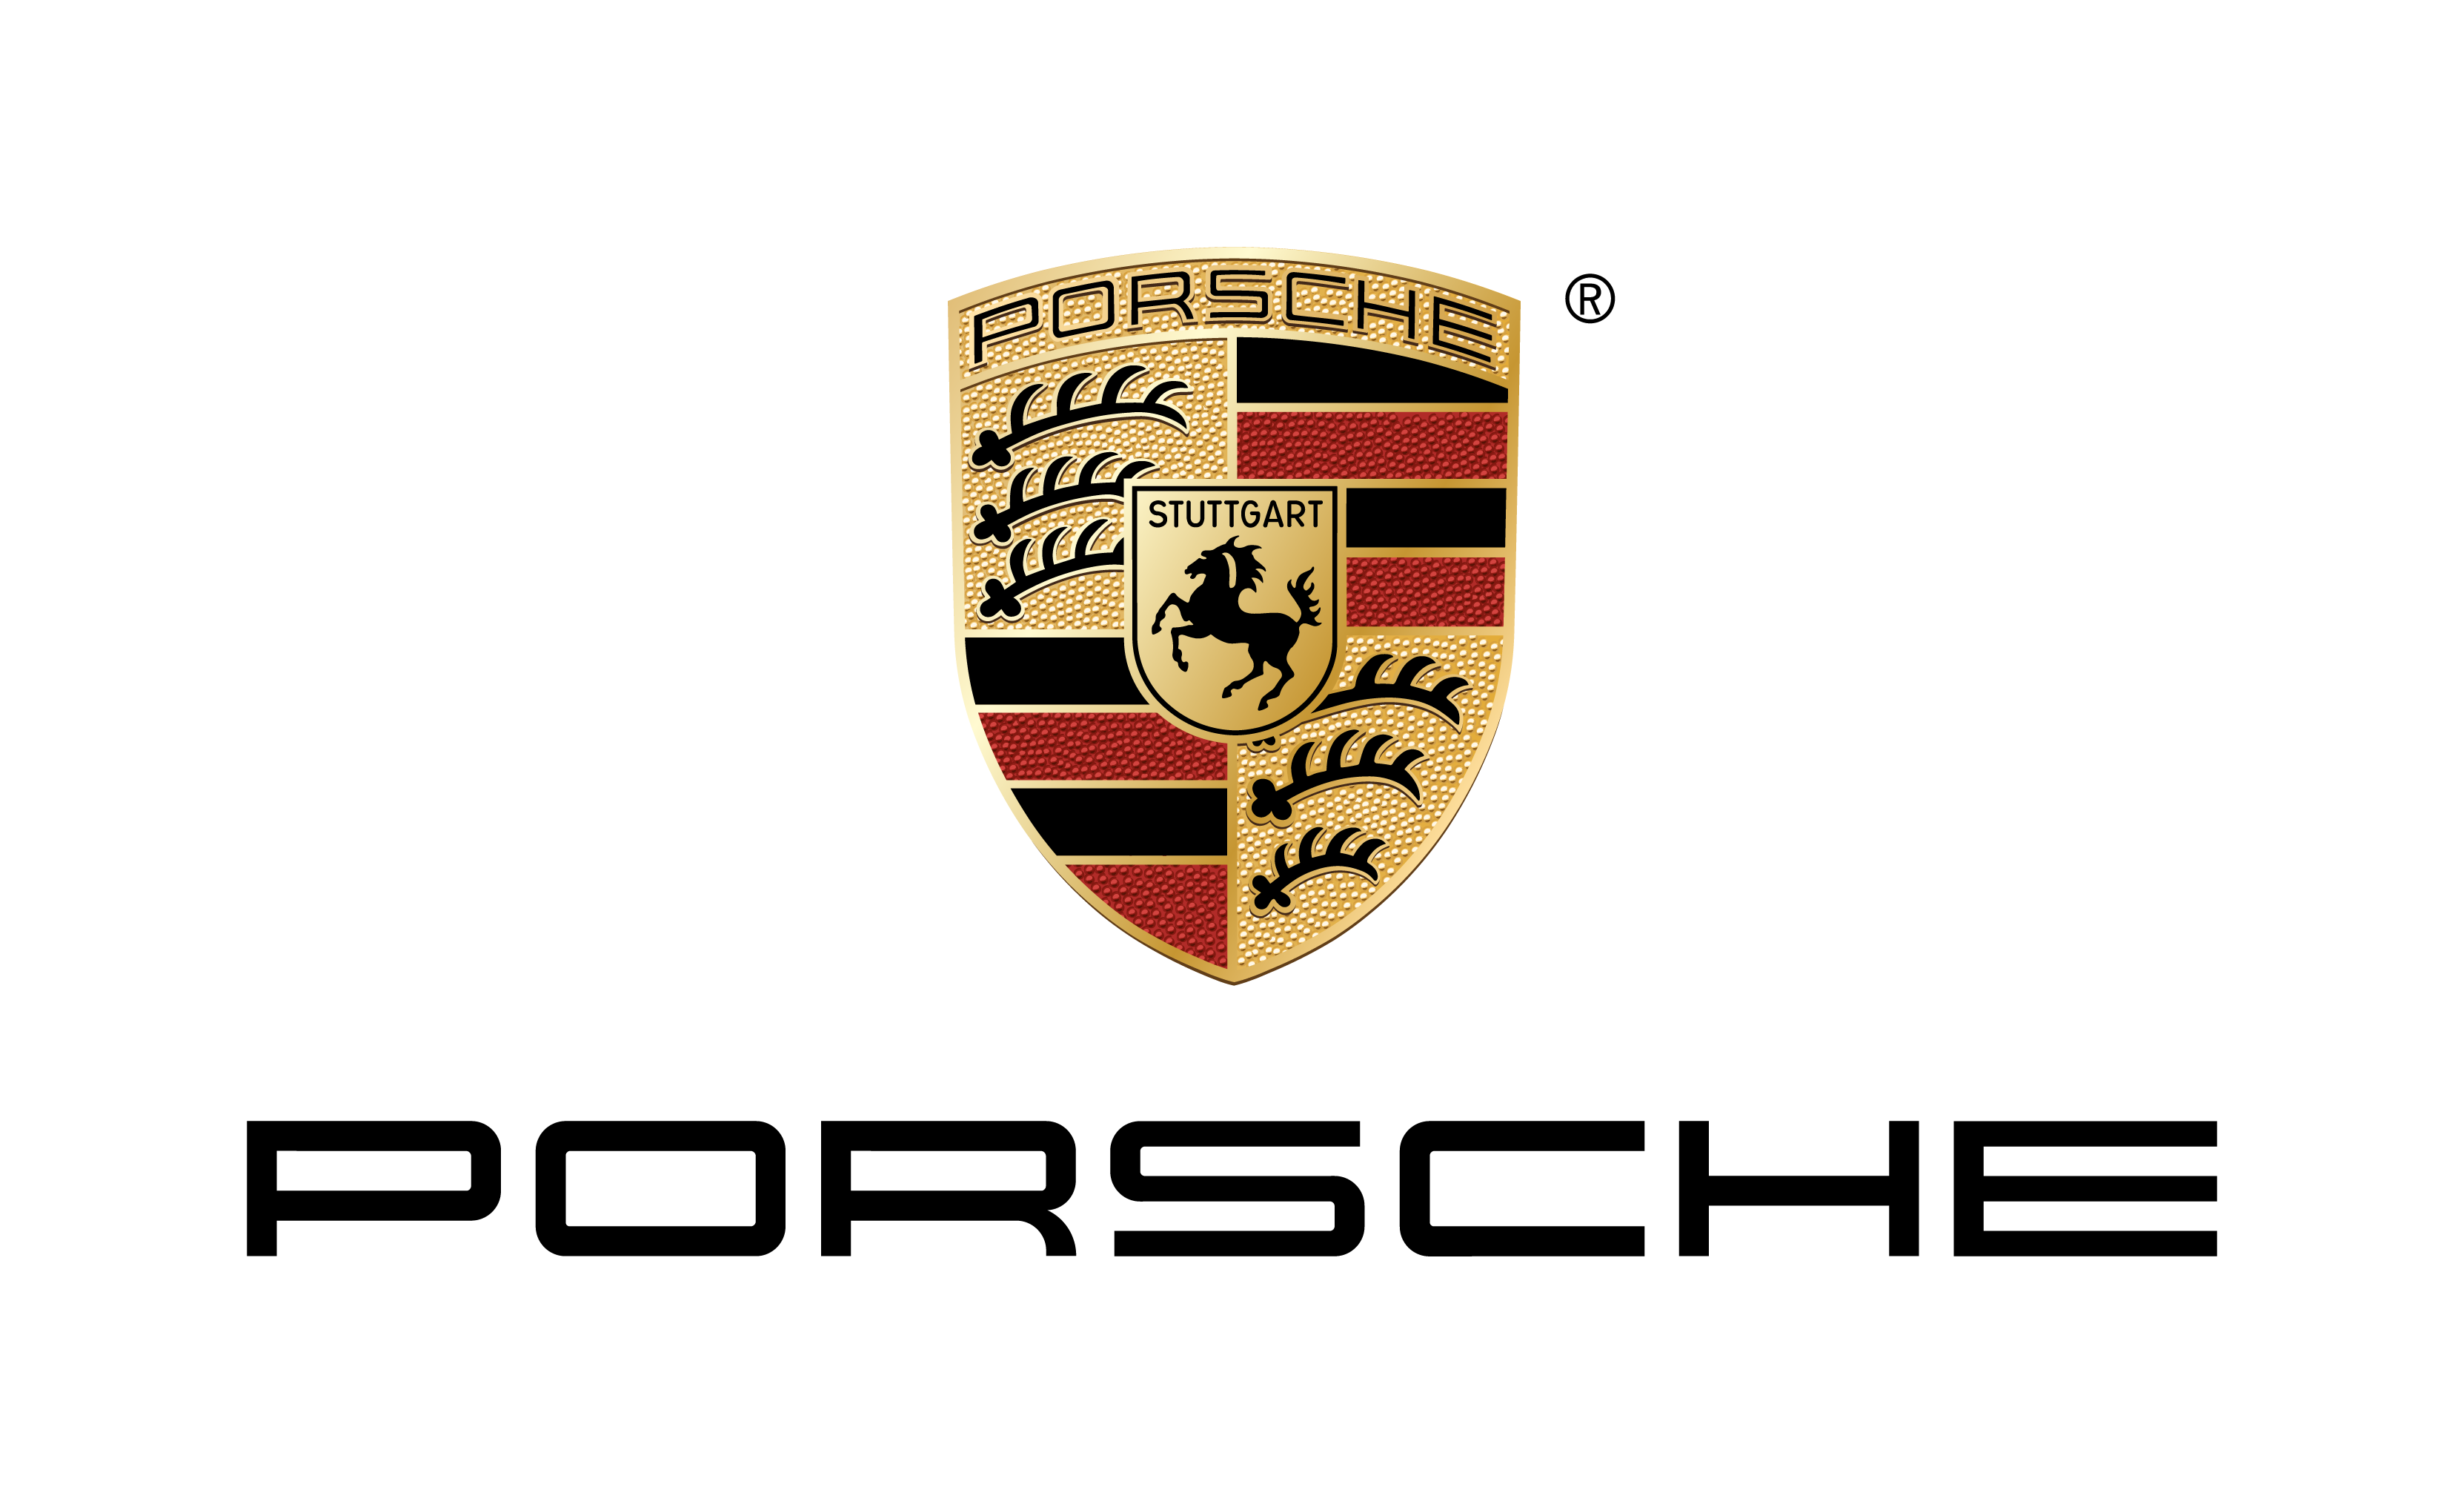 Porsche reports U.S. retail sales for Q4 and full-year 2022